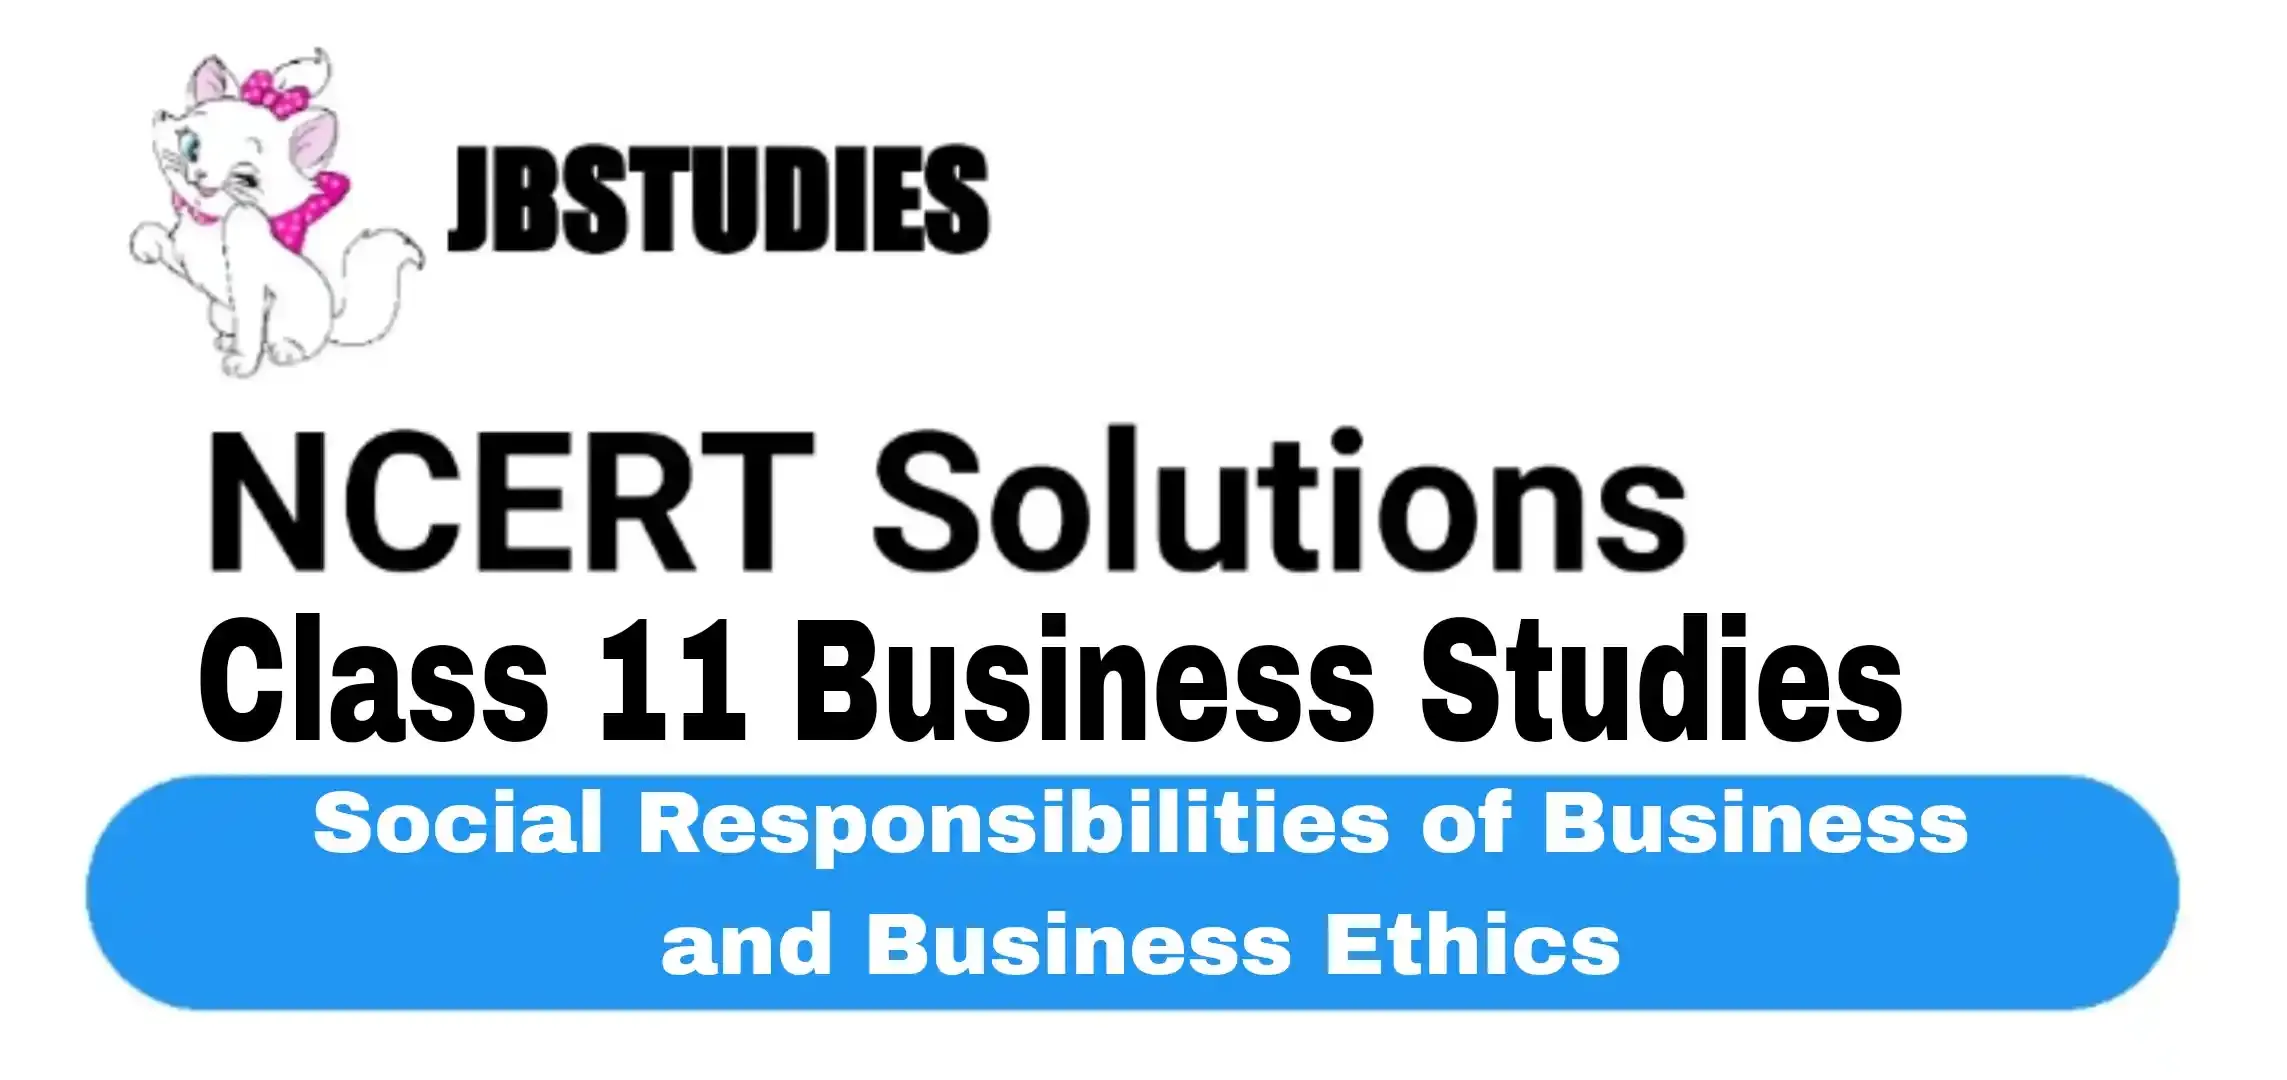 Solutions Class 11 Business Studies Chapter -6 (Social Responsibilities of Business and Business Ethics)